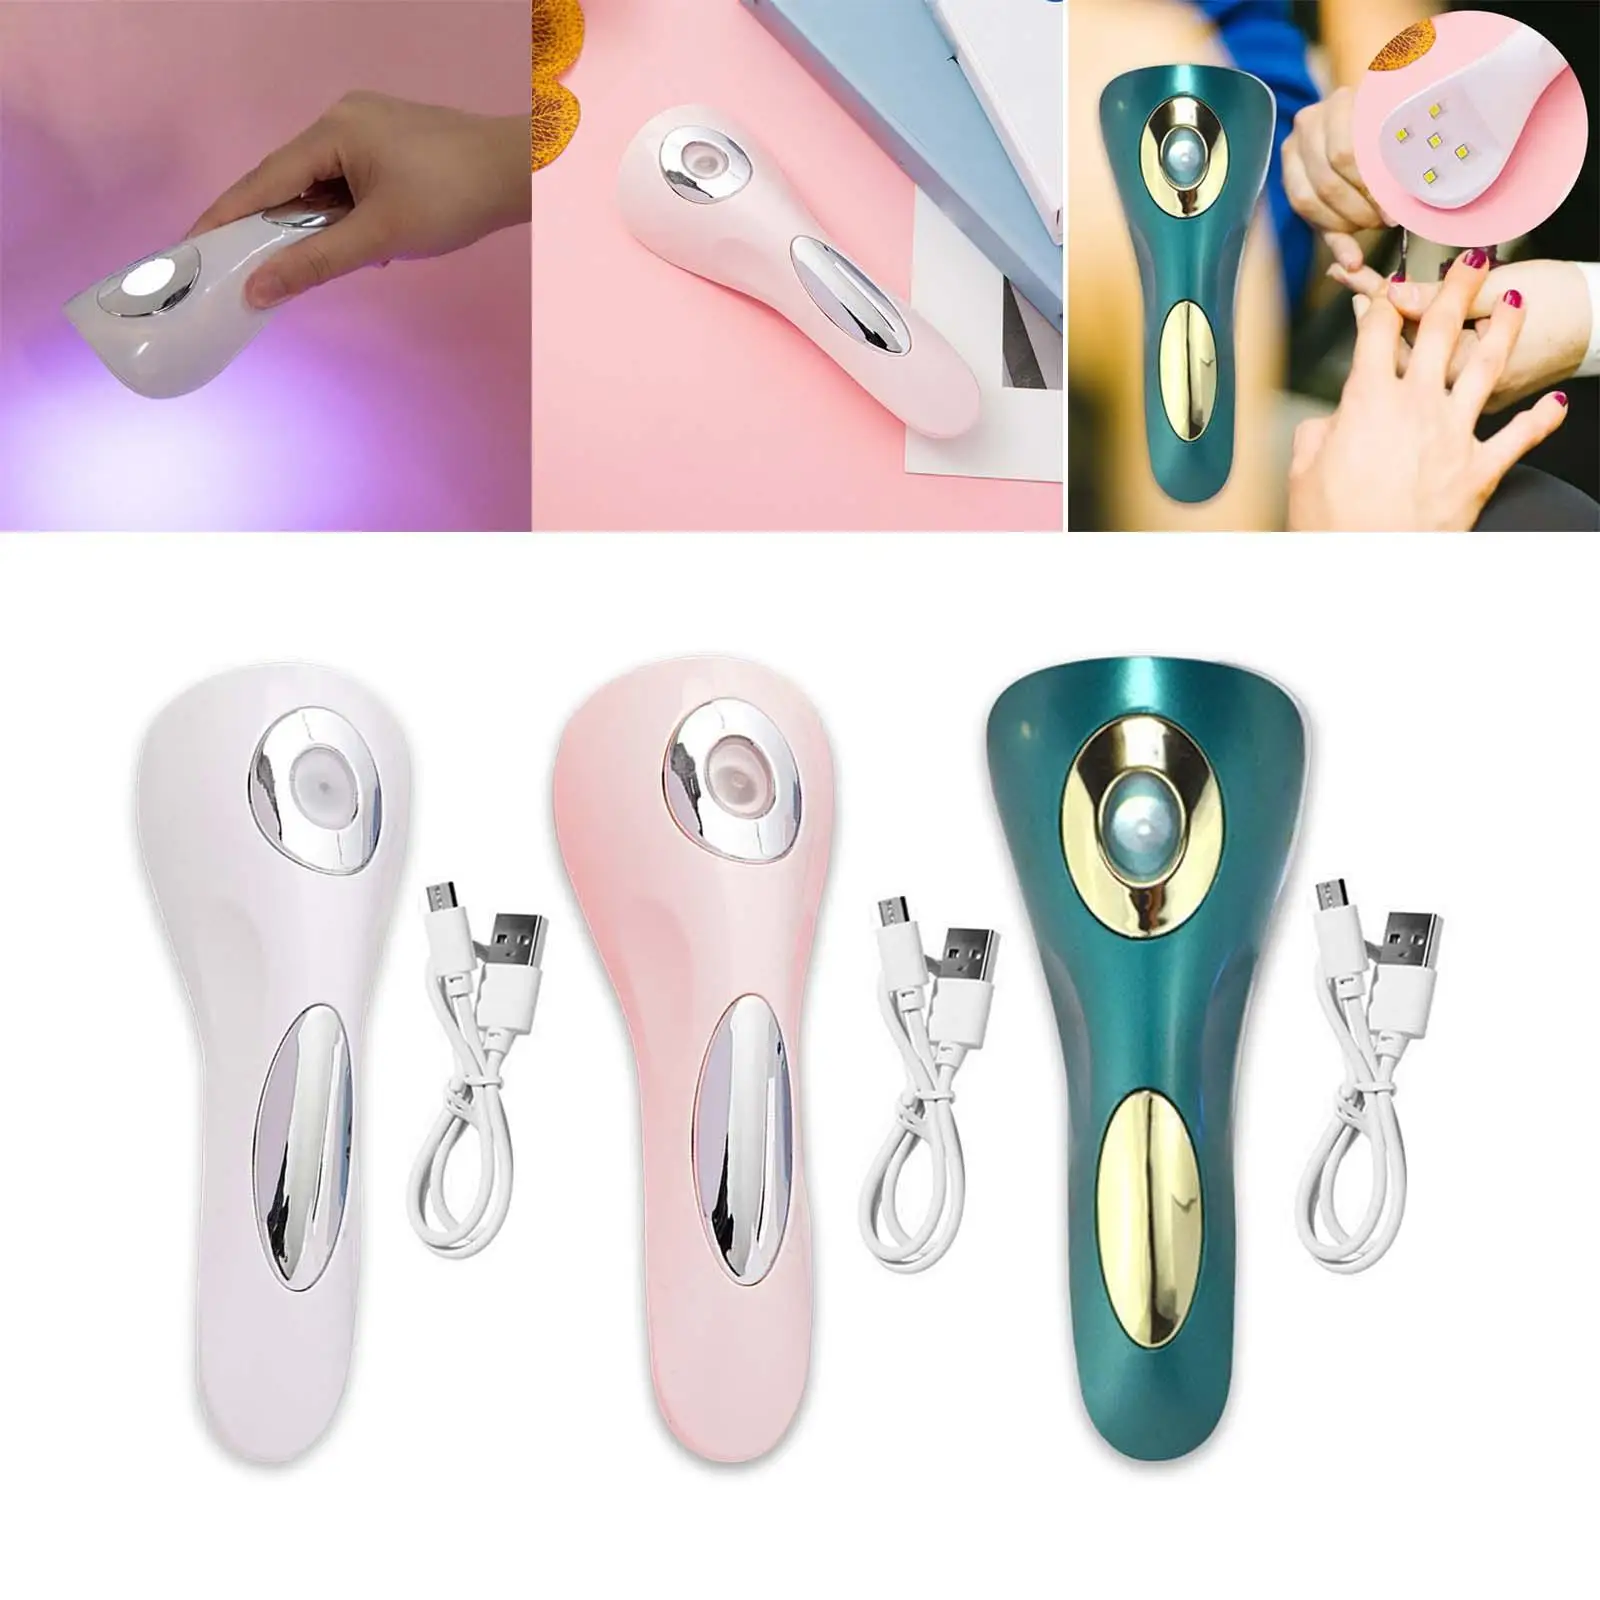 Portable Nail Light Nail Dryer Gel Nails Light Rechargable Professional Nail Art Tools for Women Girls Female Gifts